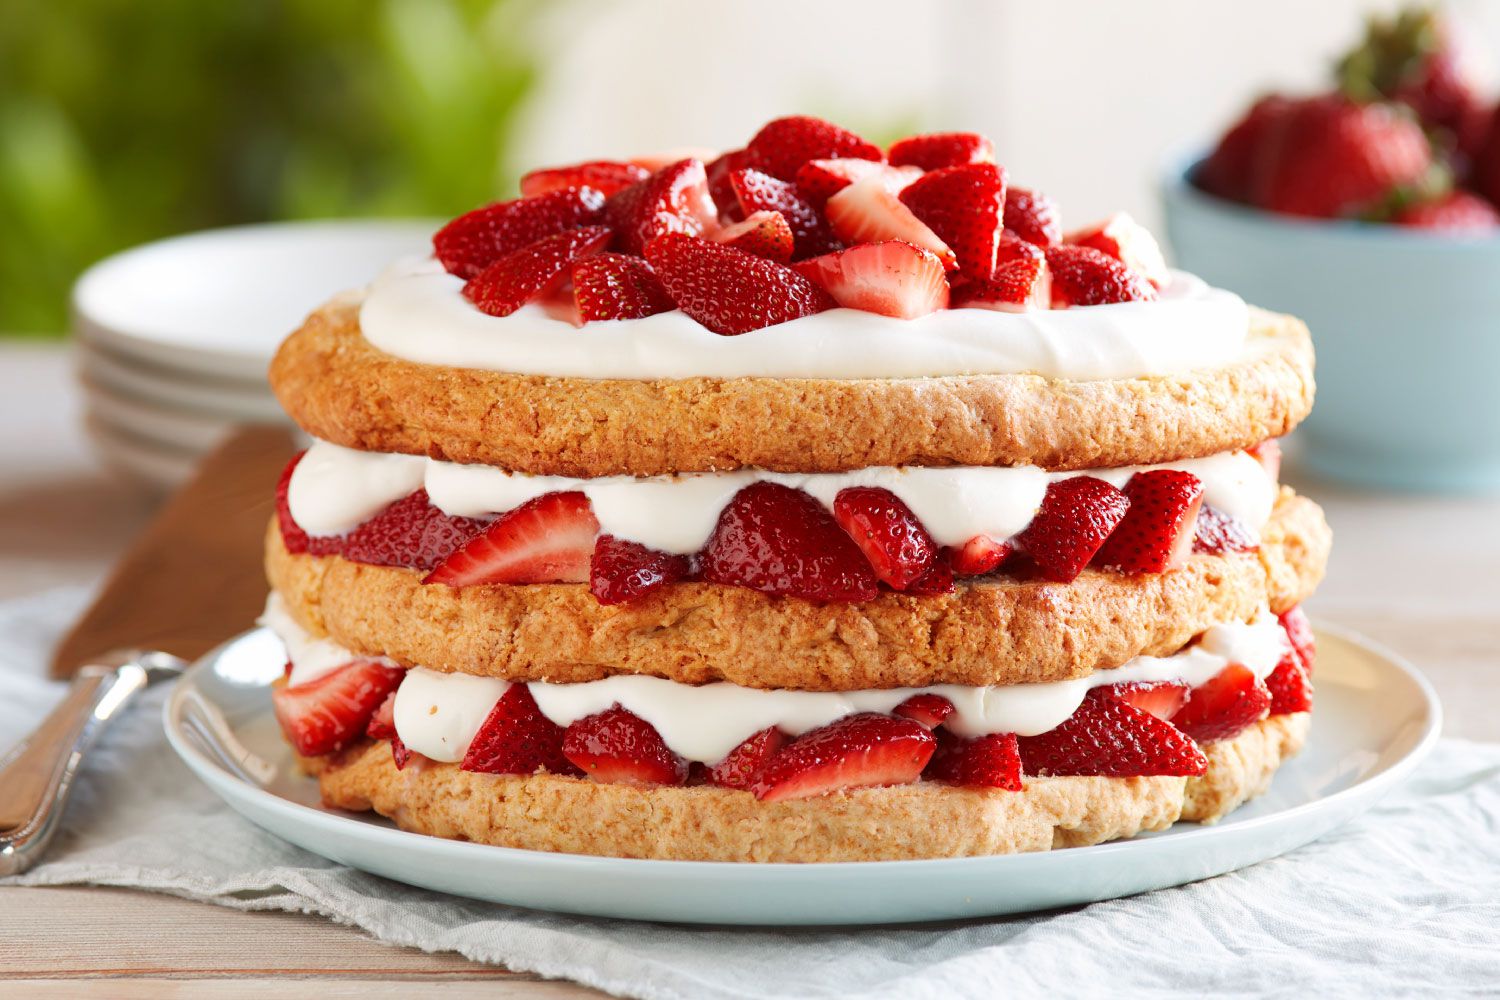 Don’t Freak Out, But We Can Guess Your Location Based on What You Eat Strawberry shortcake